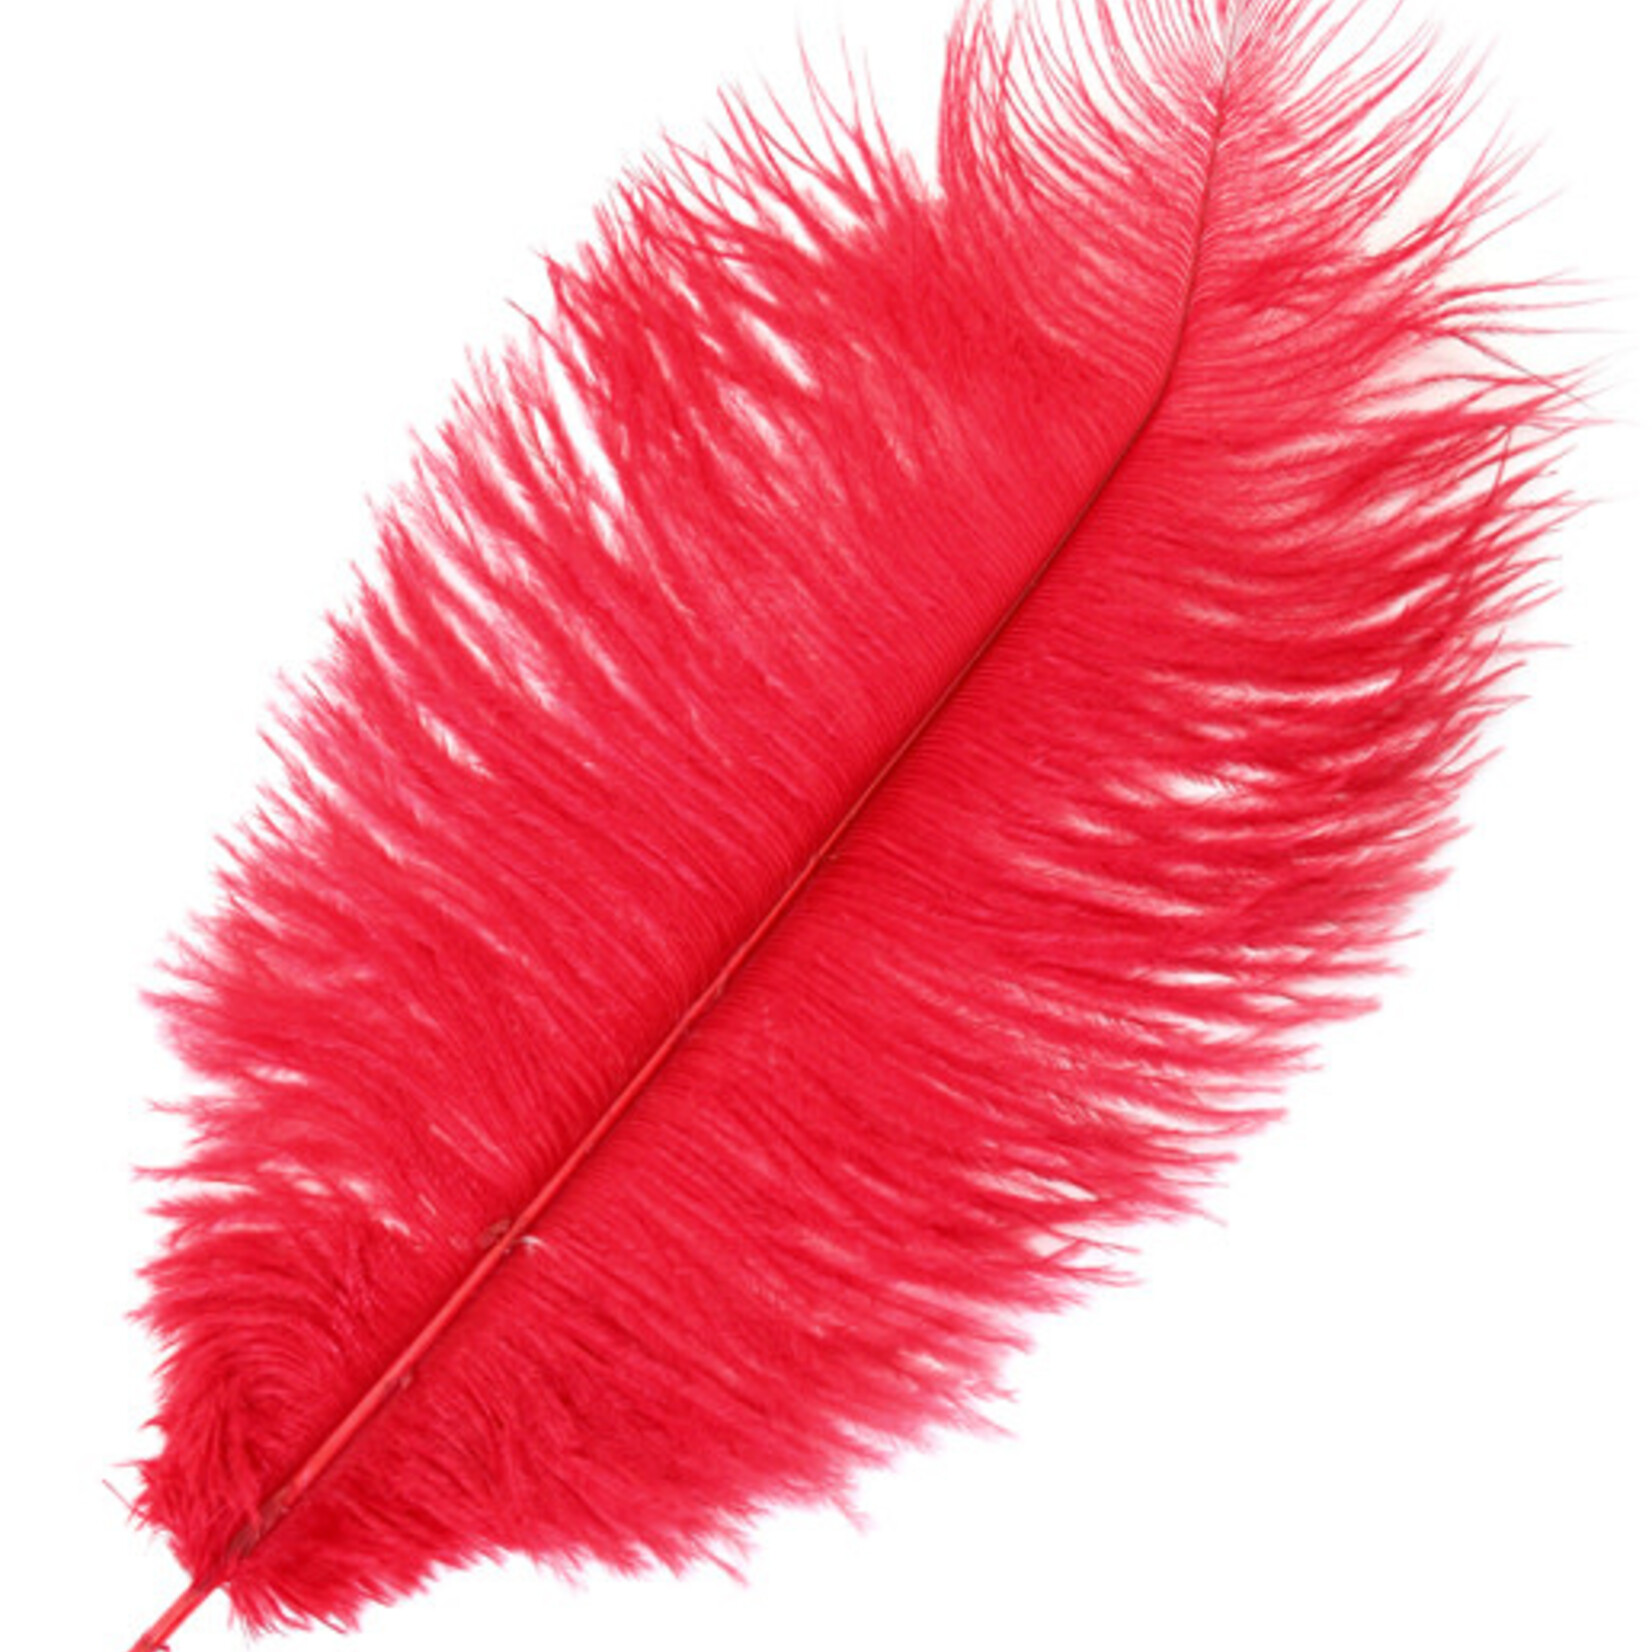 Ostrich Drab Plumes 6-8 Inch (12 pieces) Red